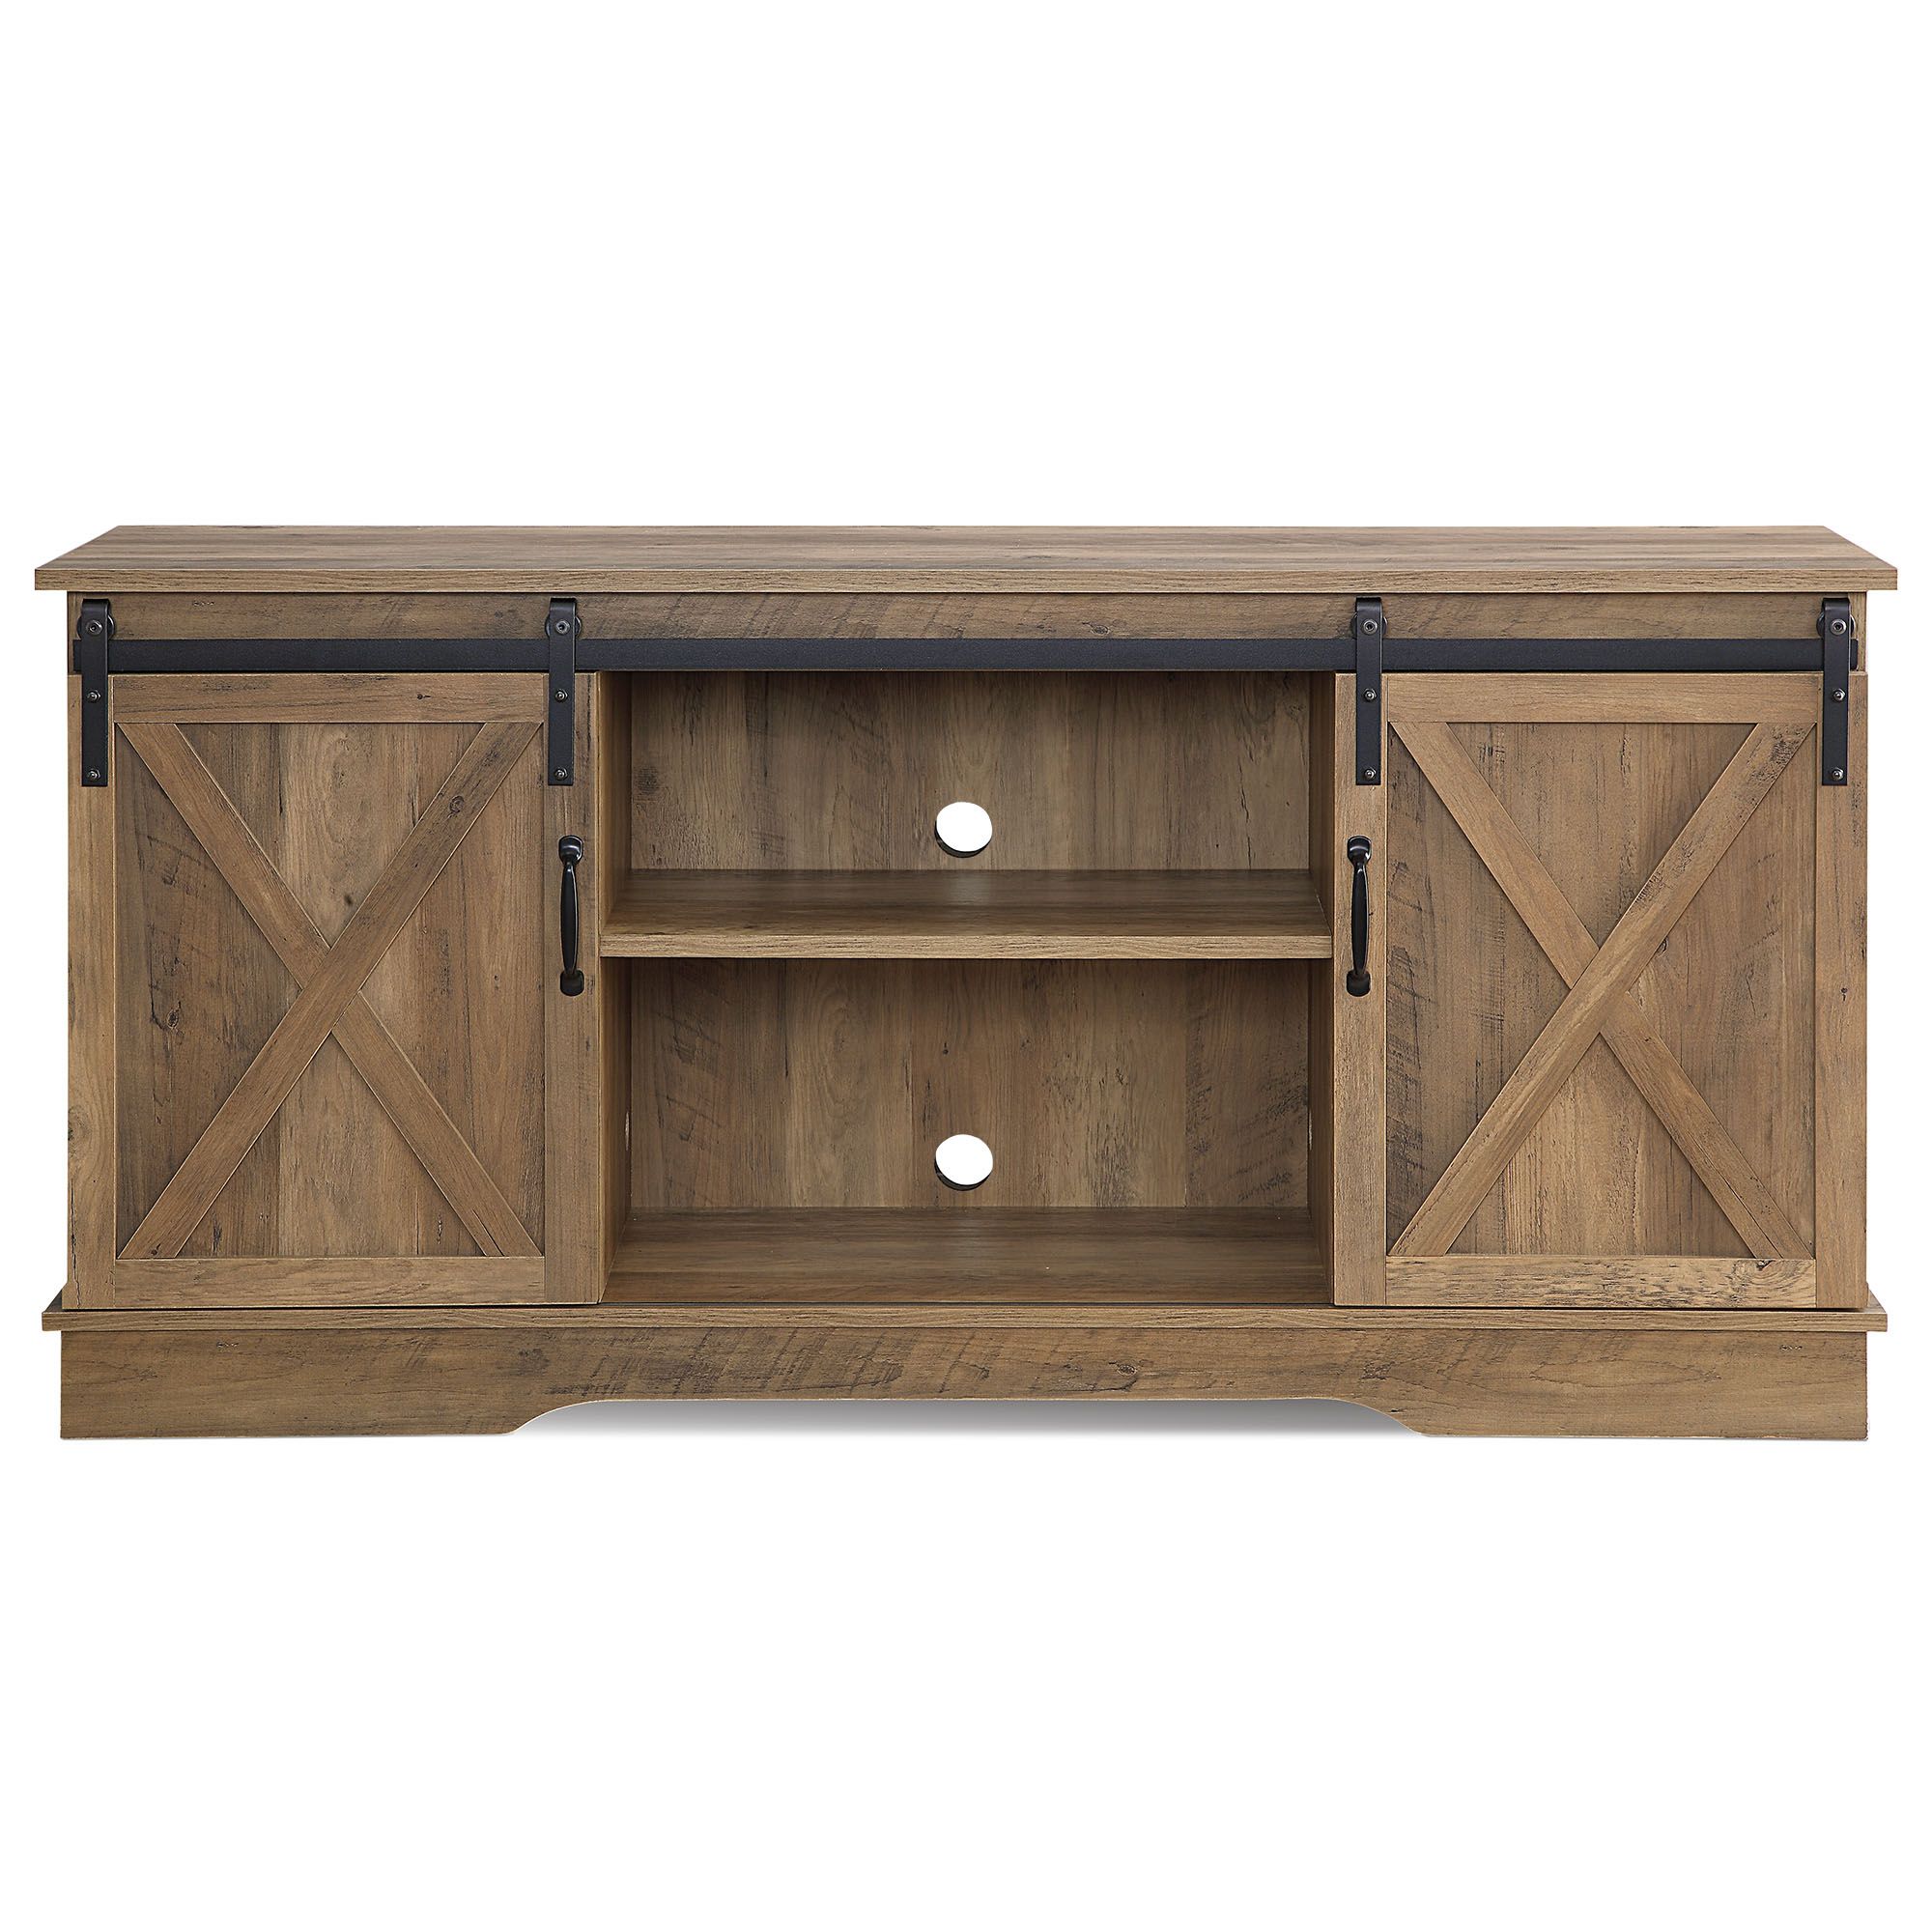 58"farmhouse Tv Stand W/sliding Door Console Table For Tvs Intended For Modern Sliding Door Tv Stands (View 12 of 15)